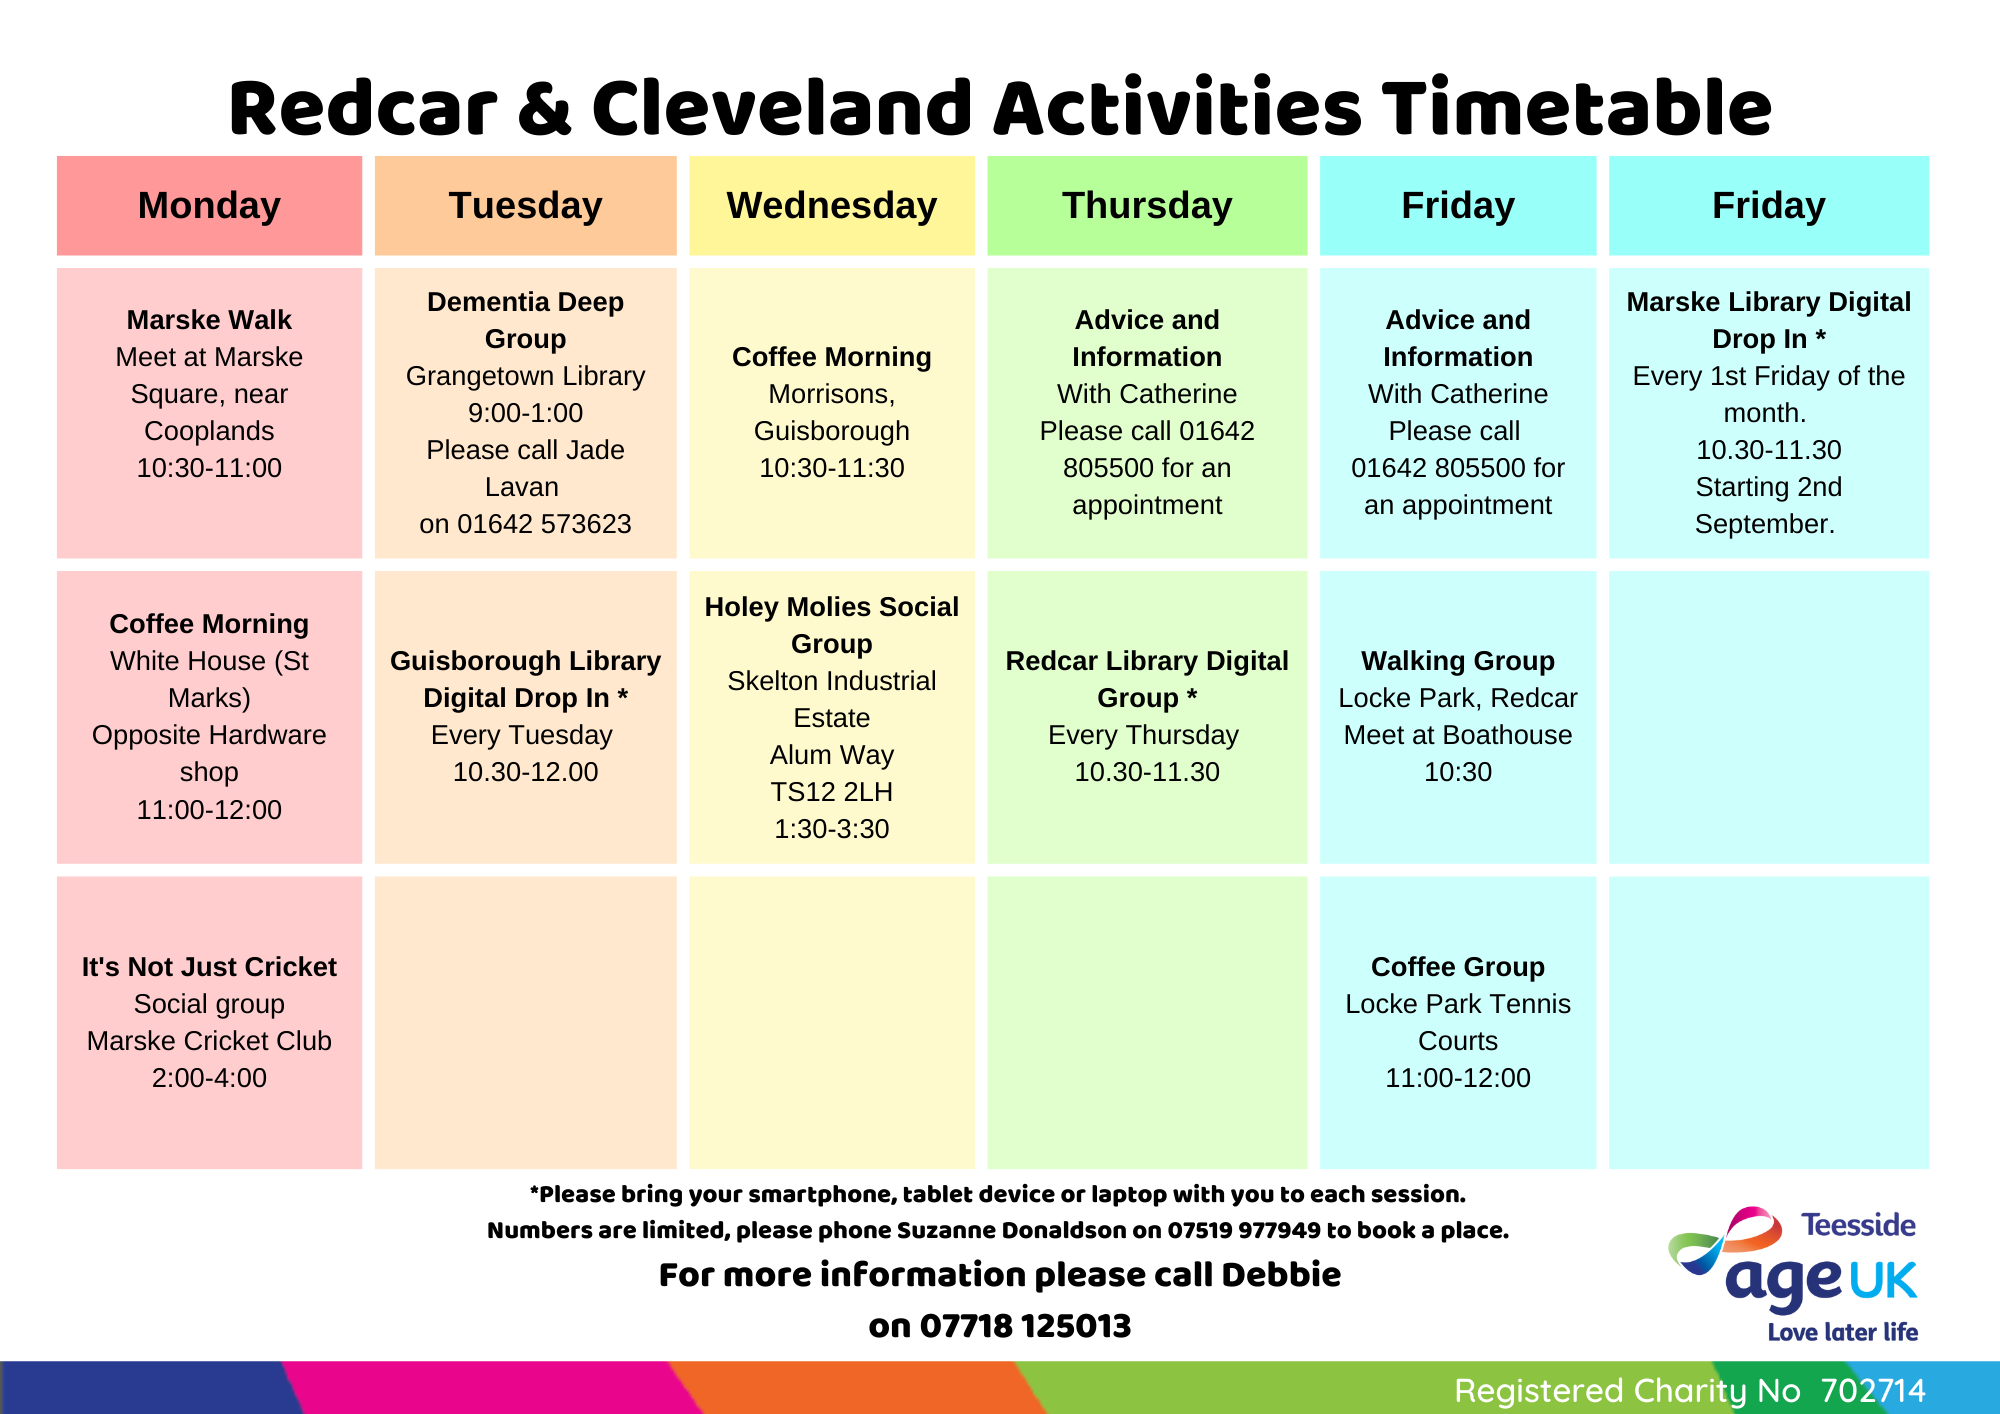 Age UK Teesside's Activities in Redcar & Cleveland